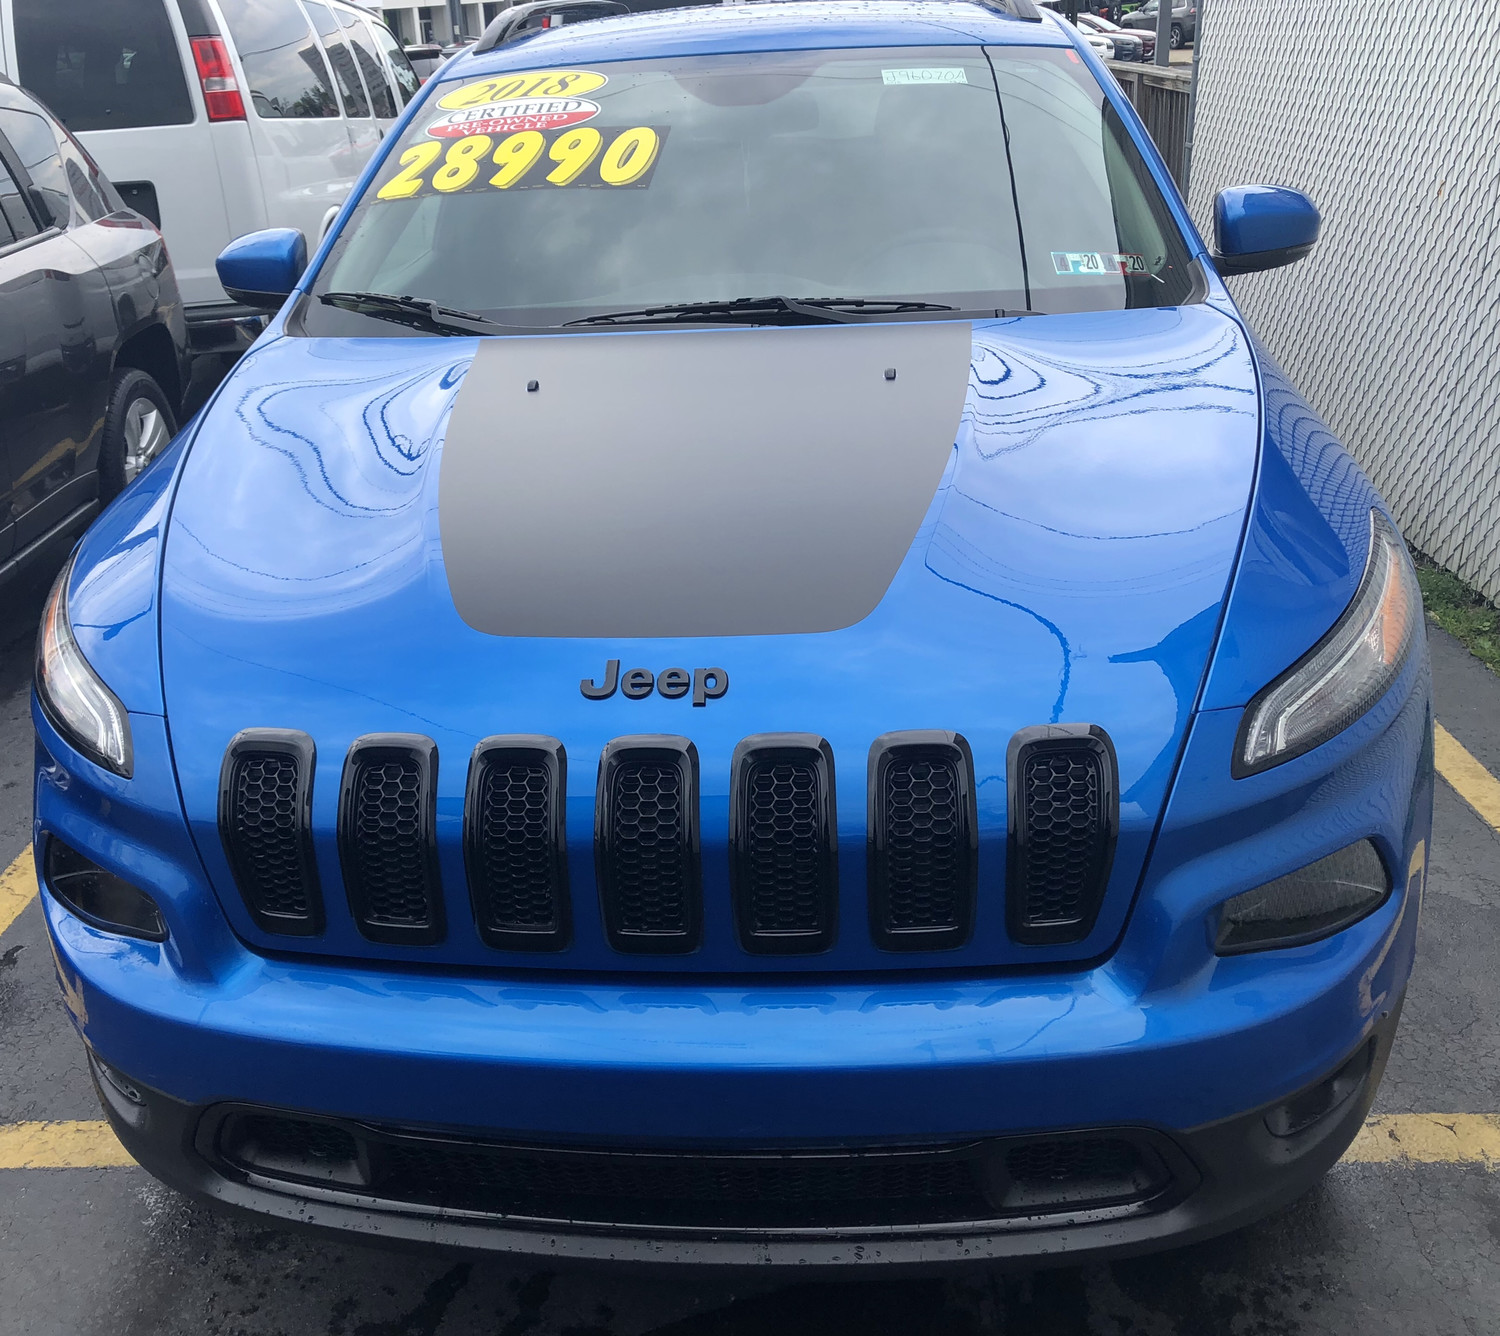 2014 - Up Jeep Cherokee Trailhawk Style Hood Blackout Decal